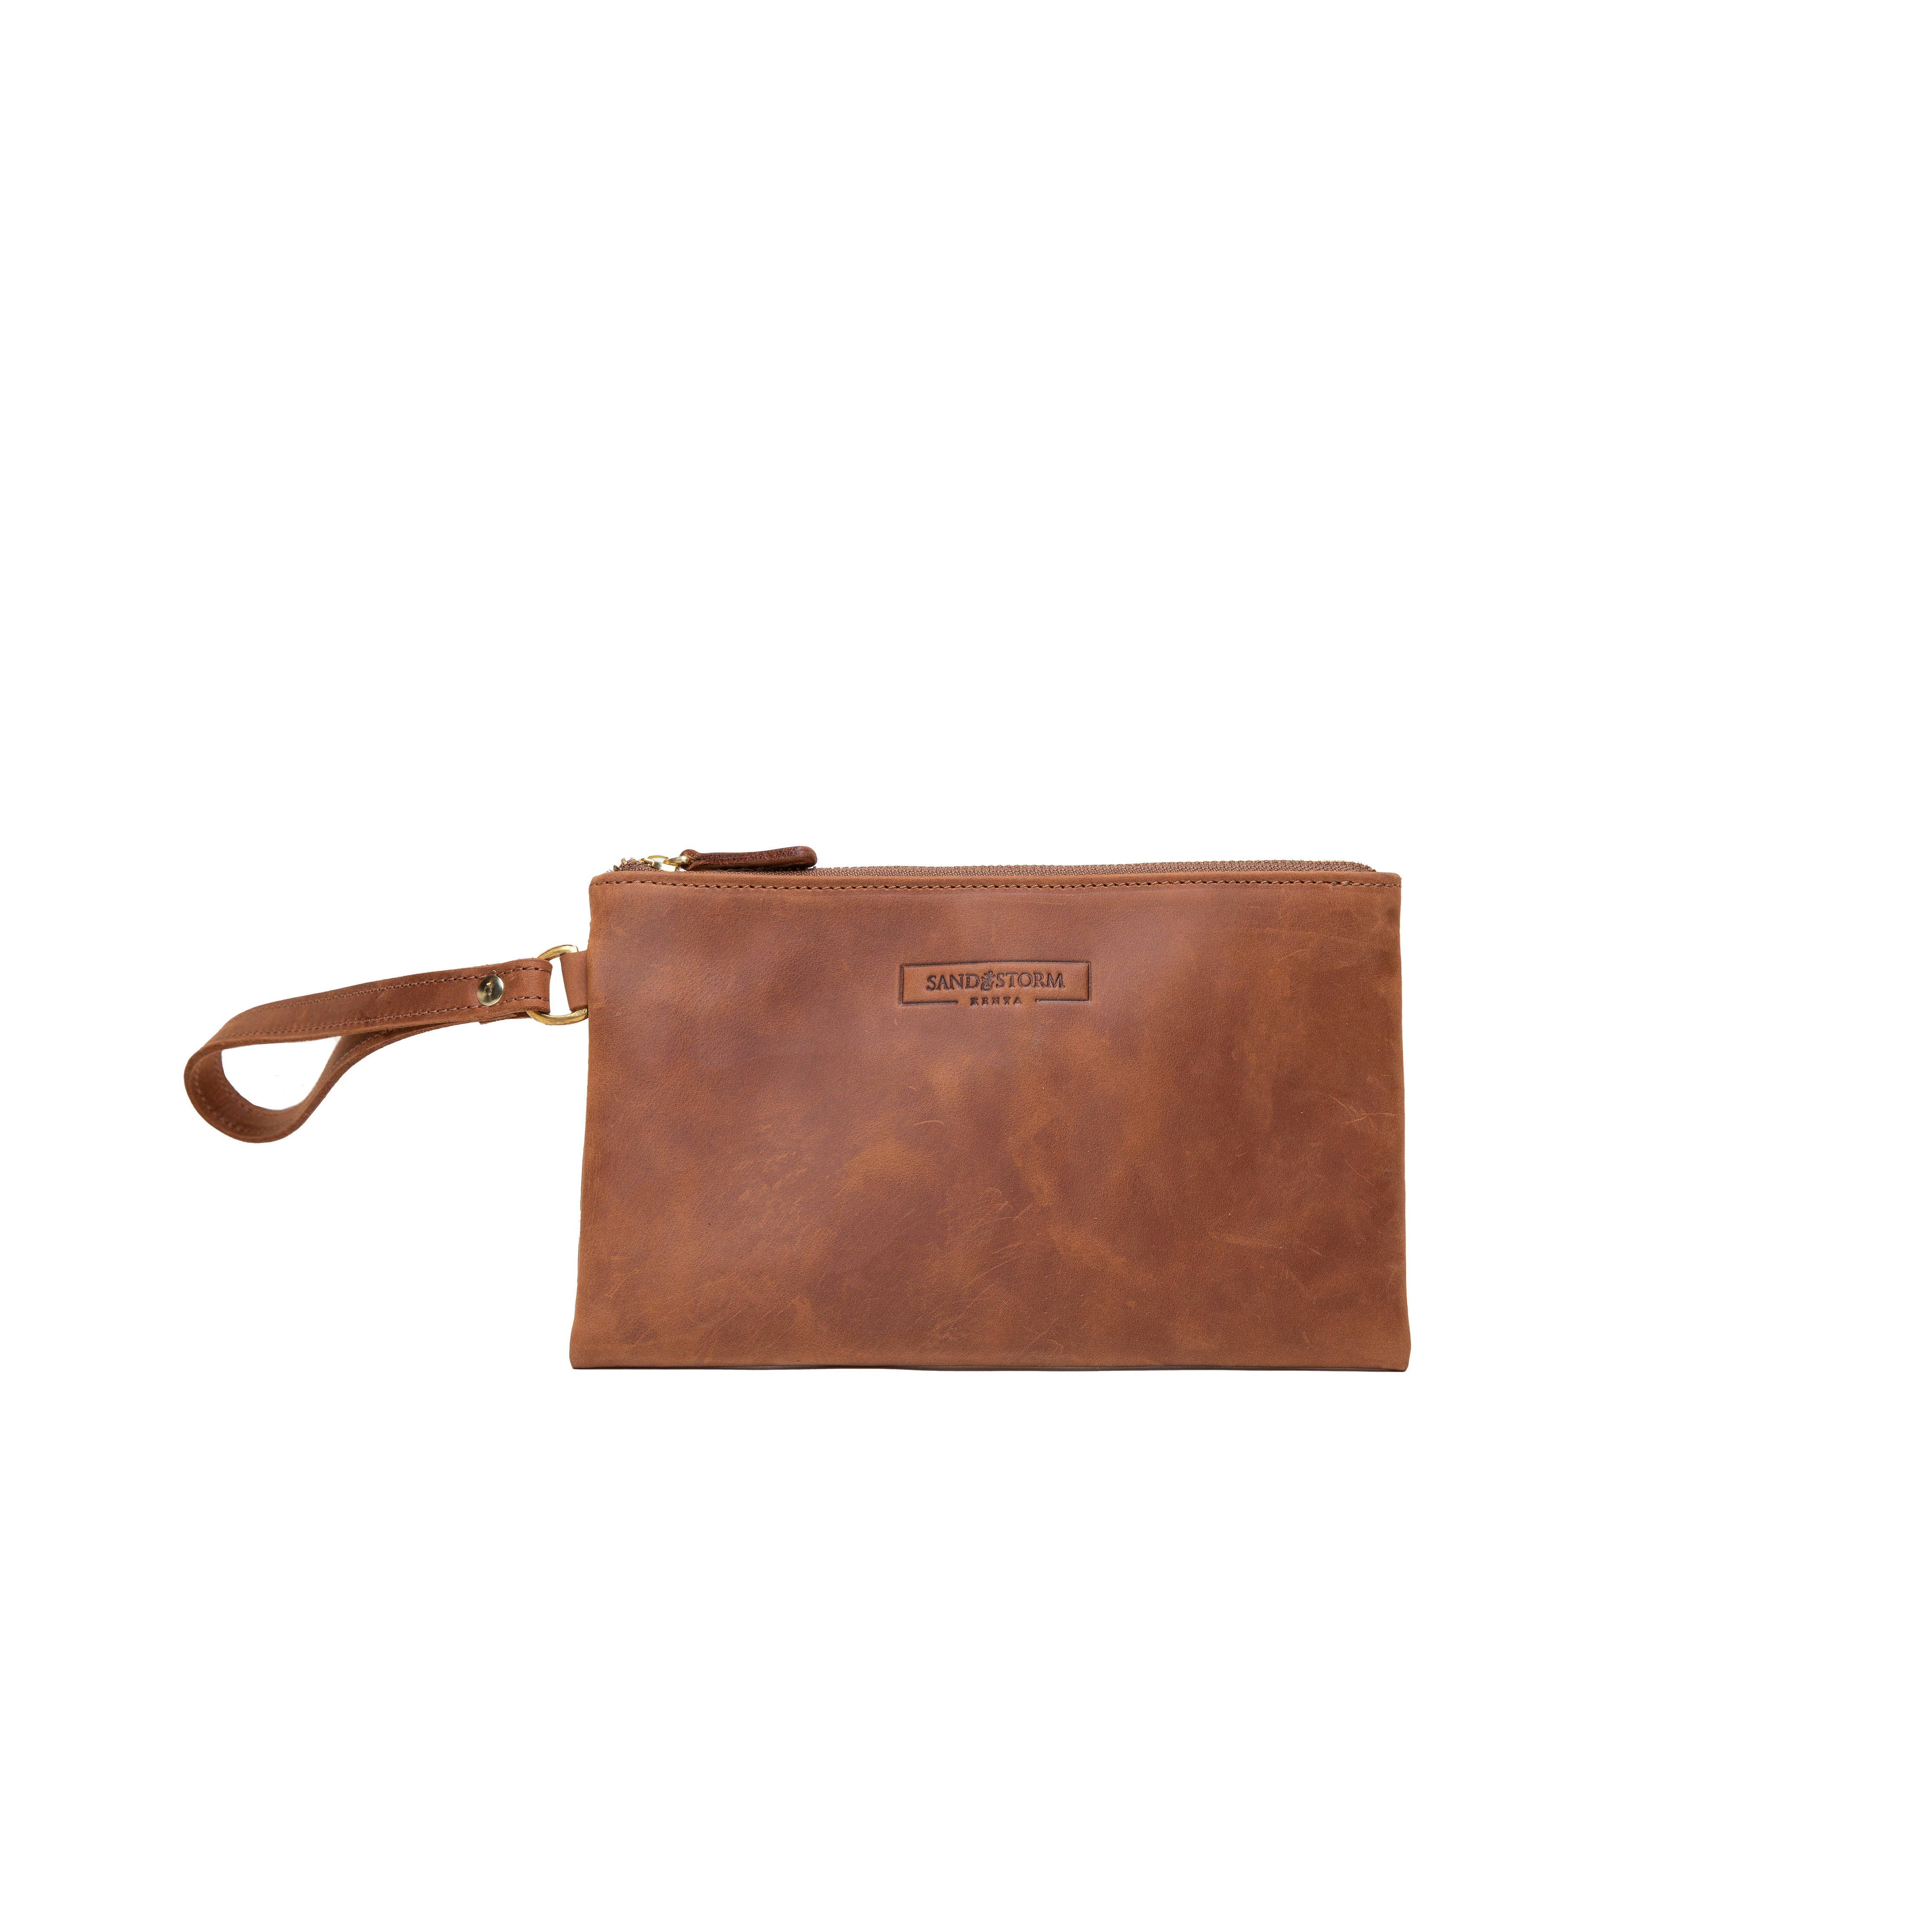 Pull-up Catherine purse